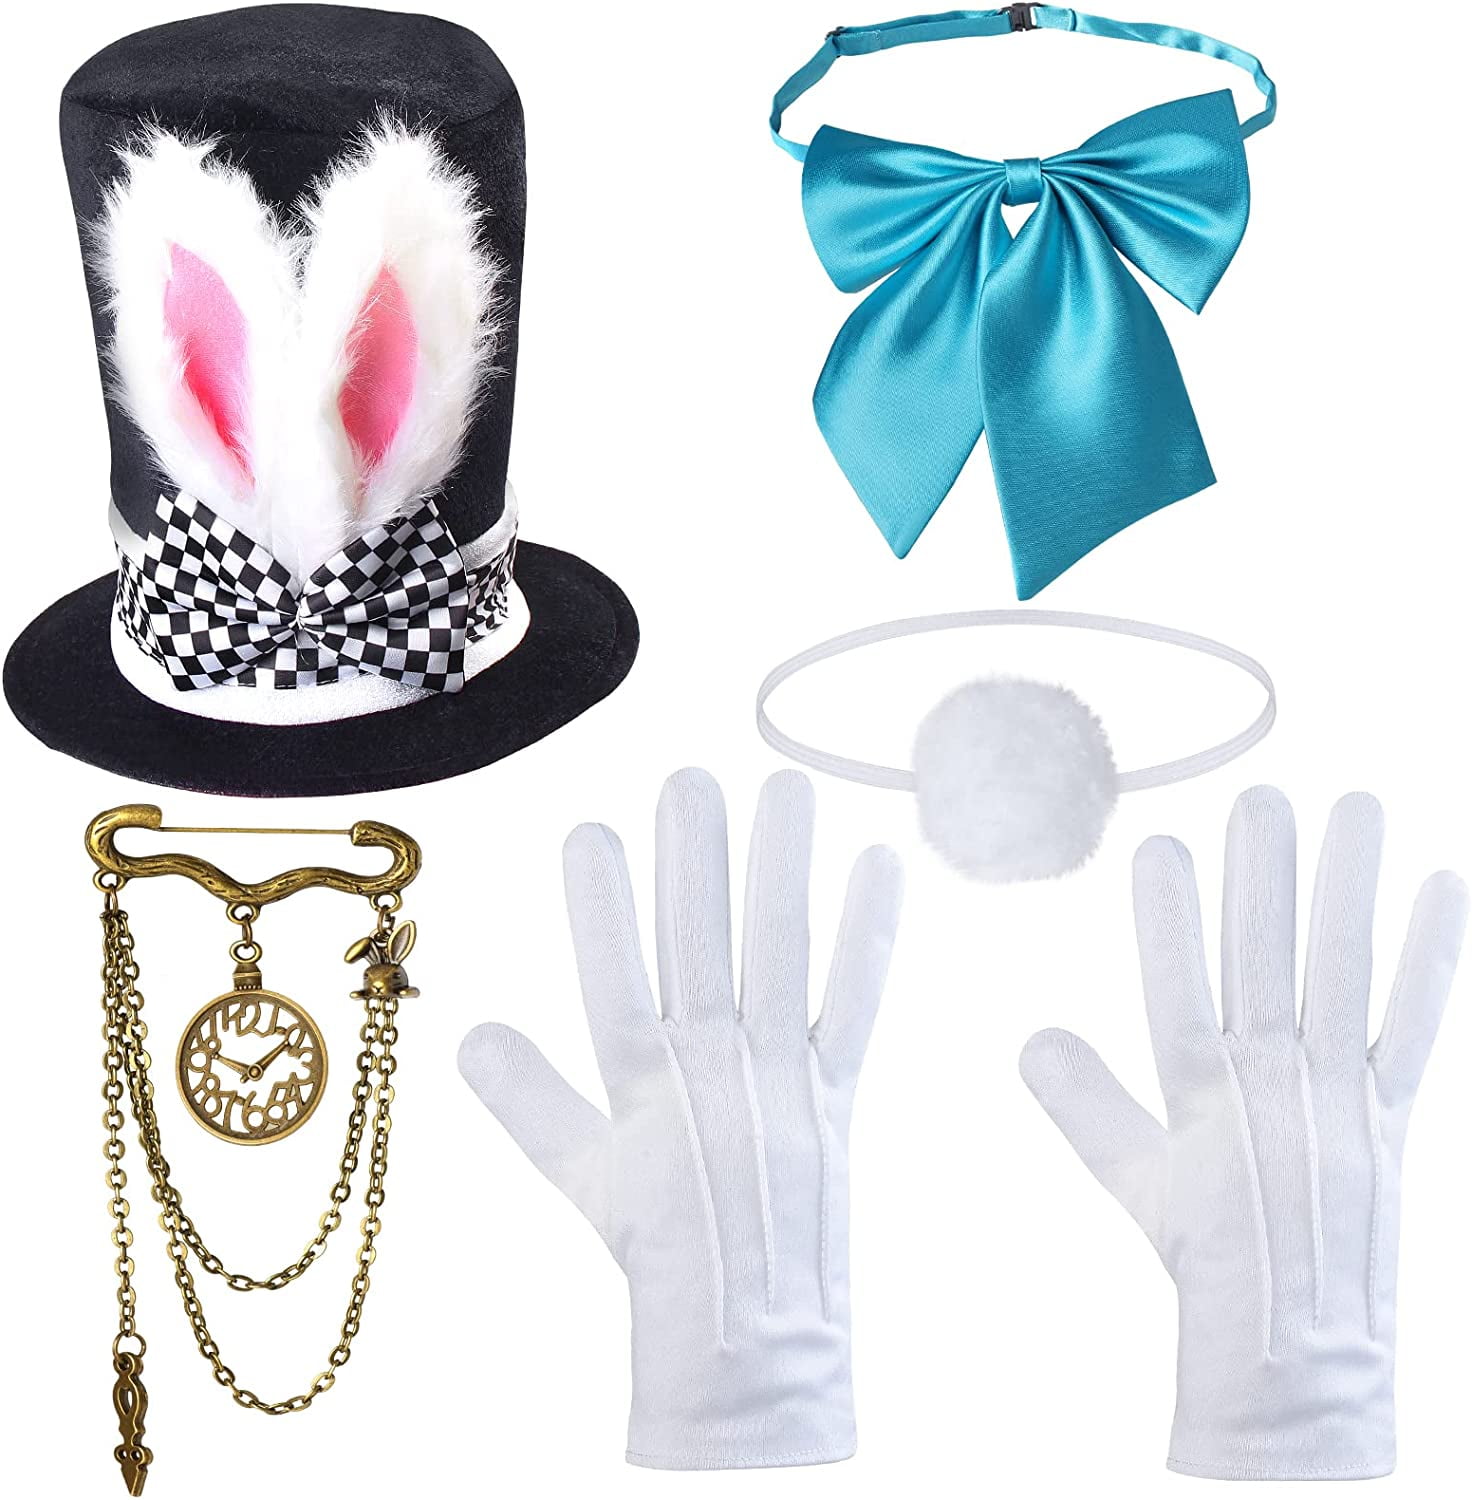 4E's Novelty Mad Hatter Costume Accessory Set for Adult Women Men, White  Rabbit Alice Wonderland Costume Accessories Hat Tea Party Dress Up